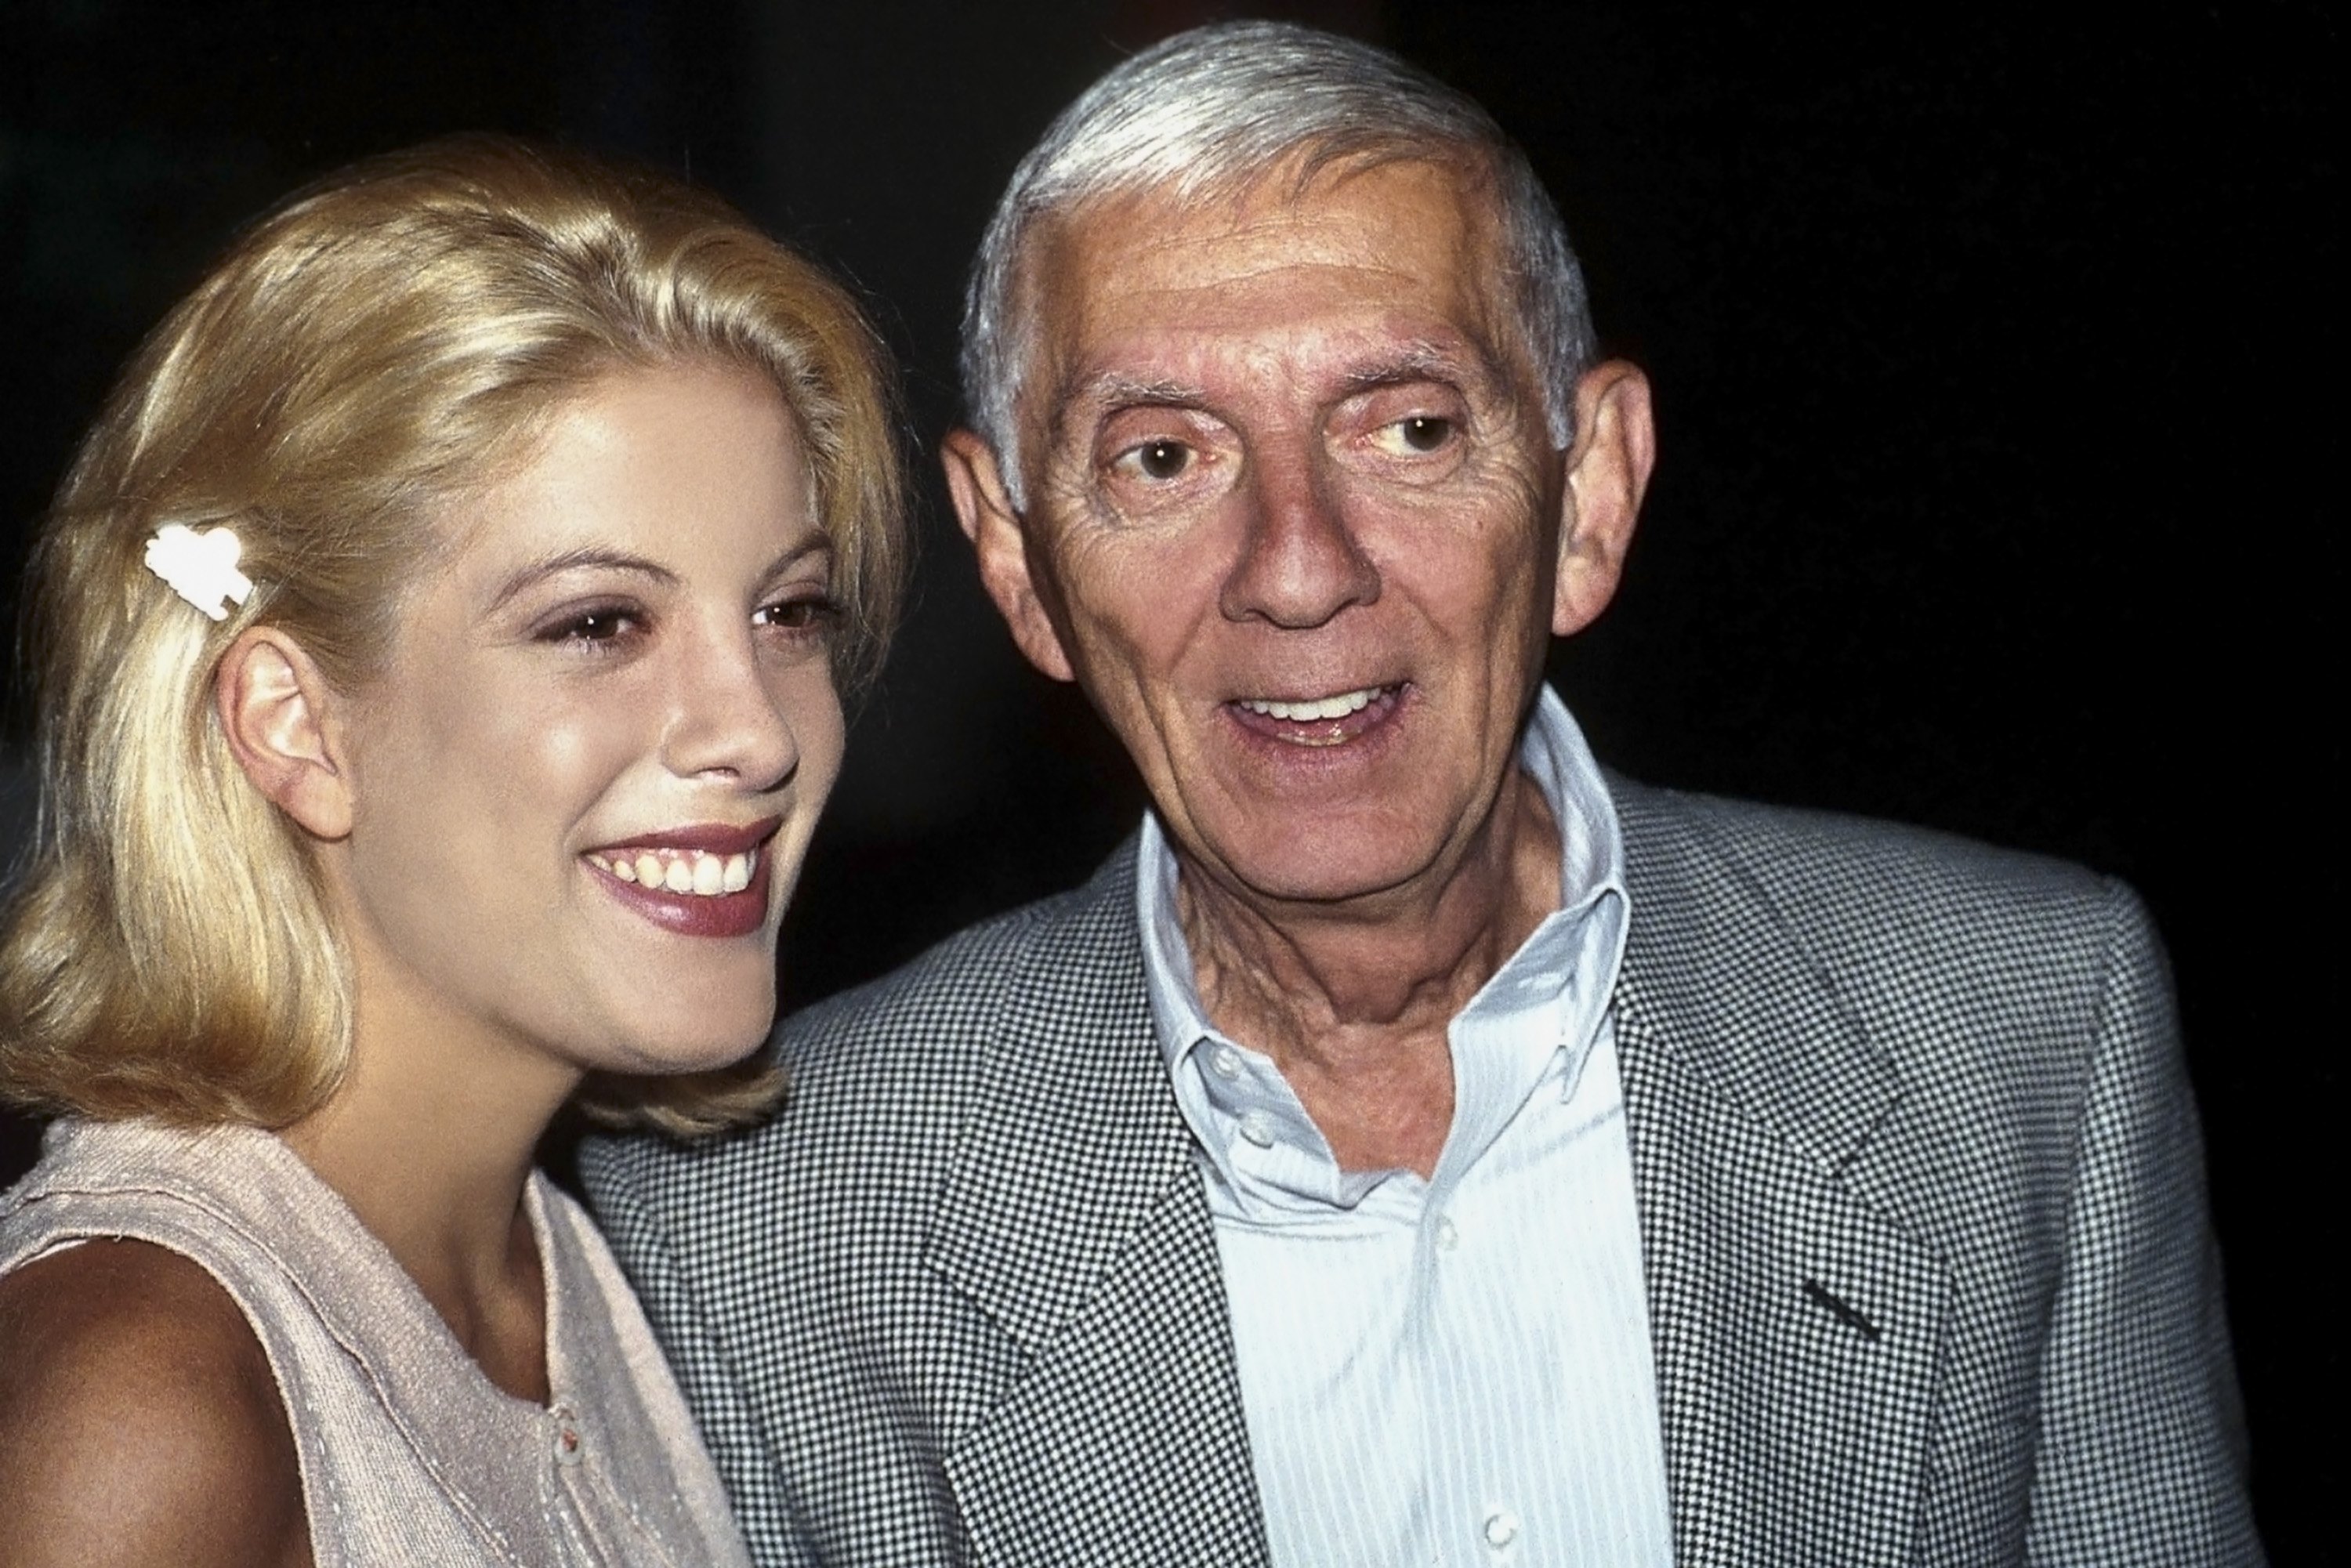 Aaron Spelling and daughter Tori Spelling on July 26, 1994 | Source: Getty Images